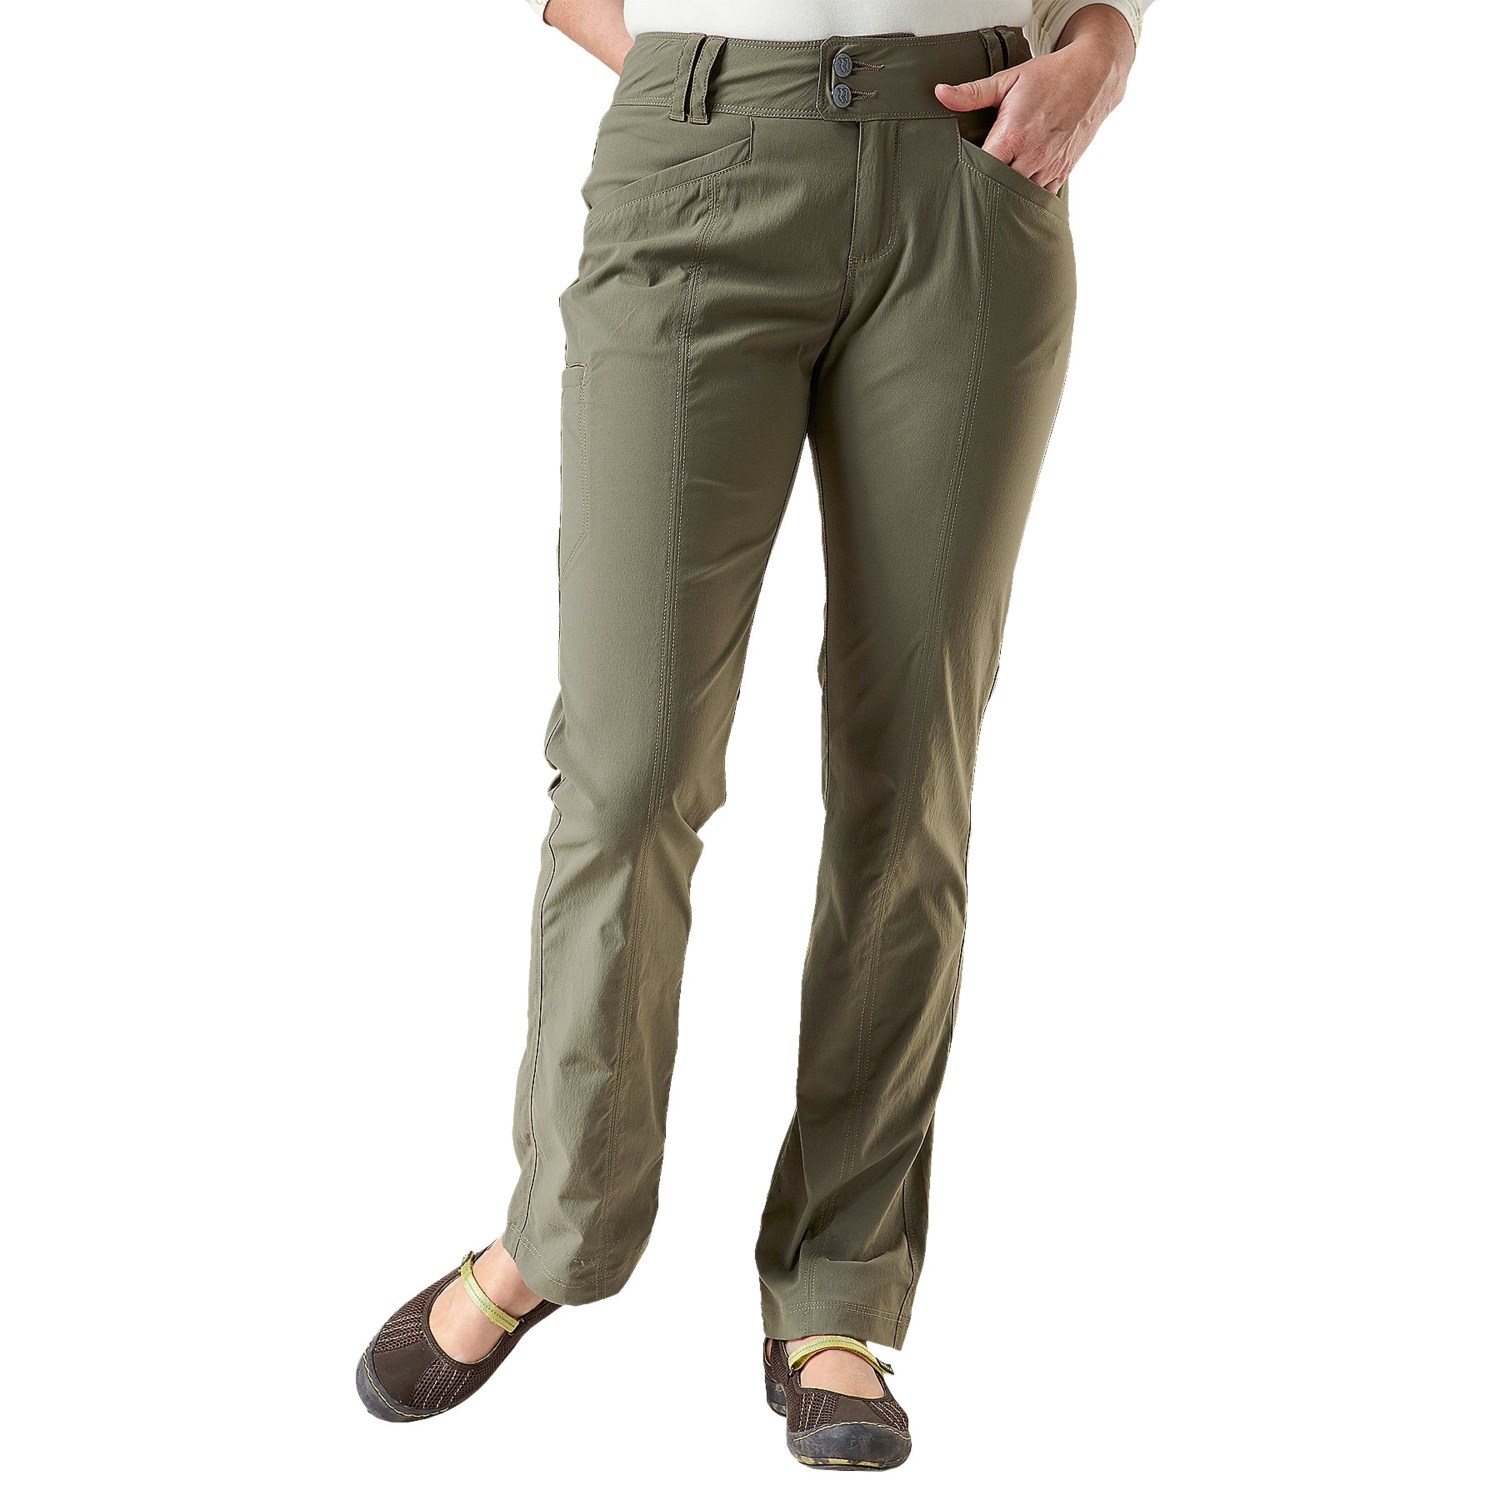 Royal Robbins Discovery Strider Pants (For Women) 8339W 40